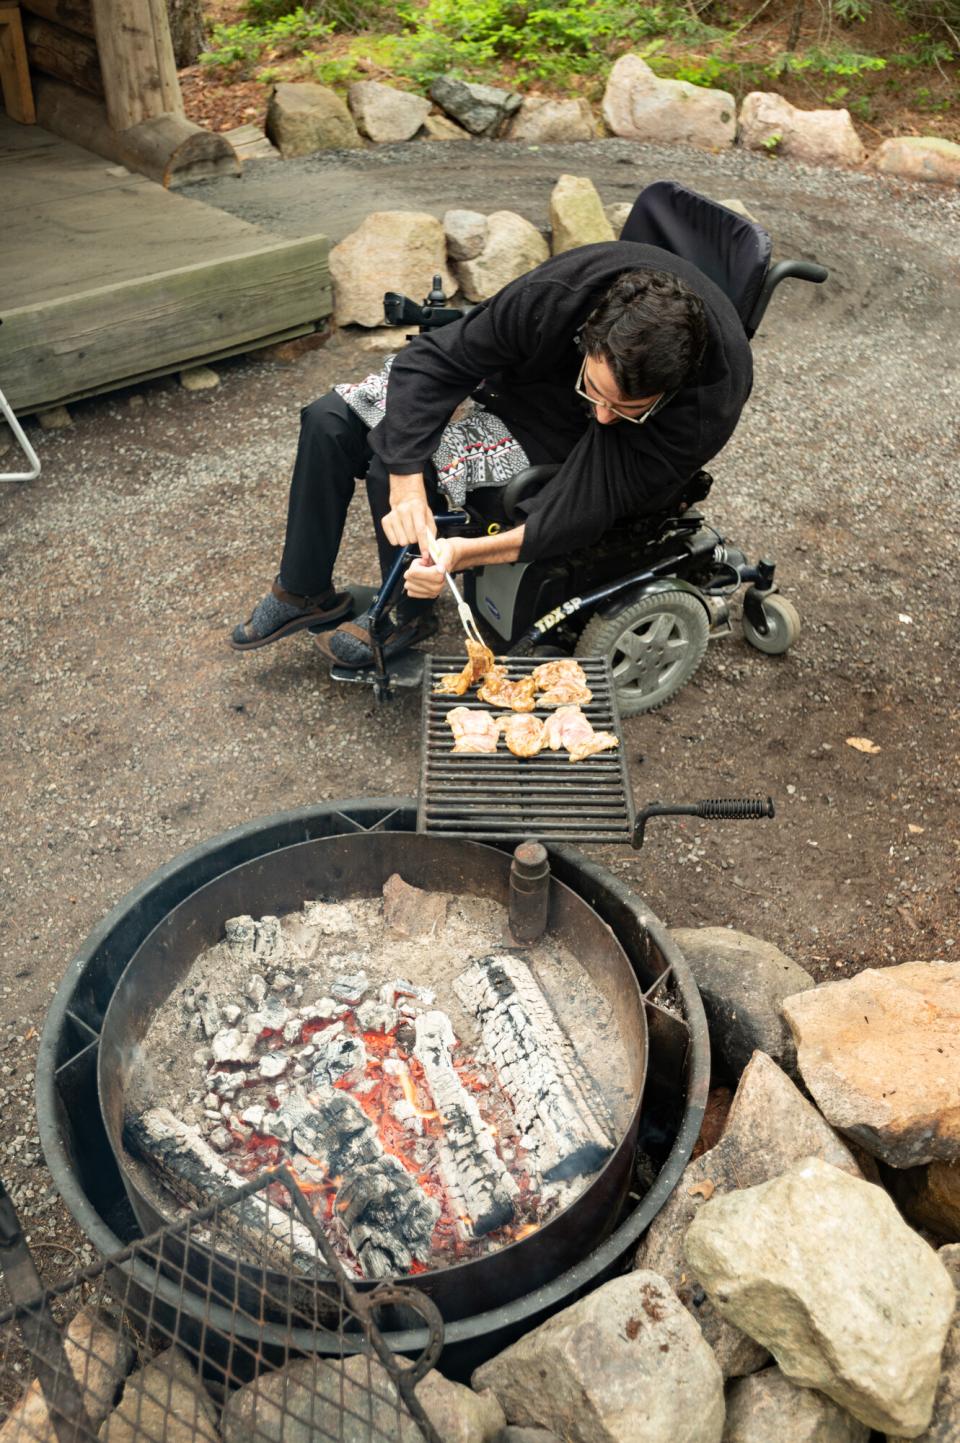 The author grilling over a specialized, accessible outdoor camping grill.